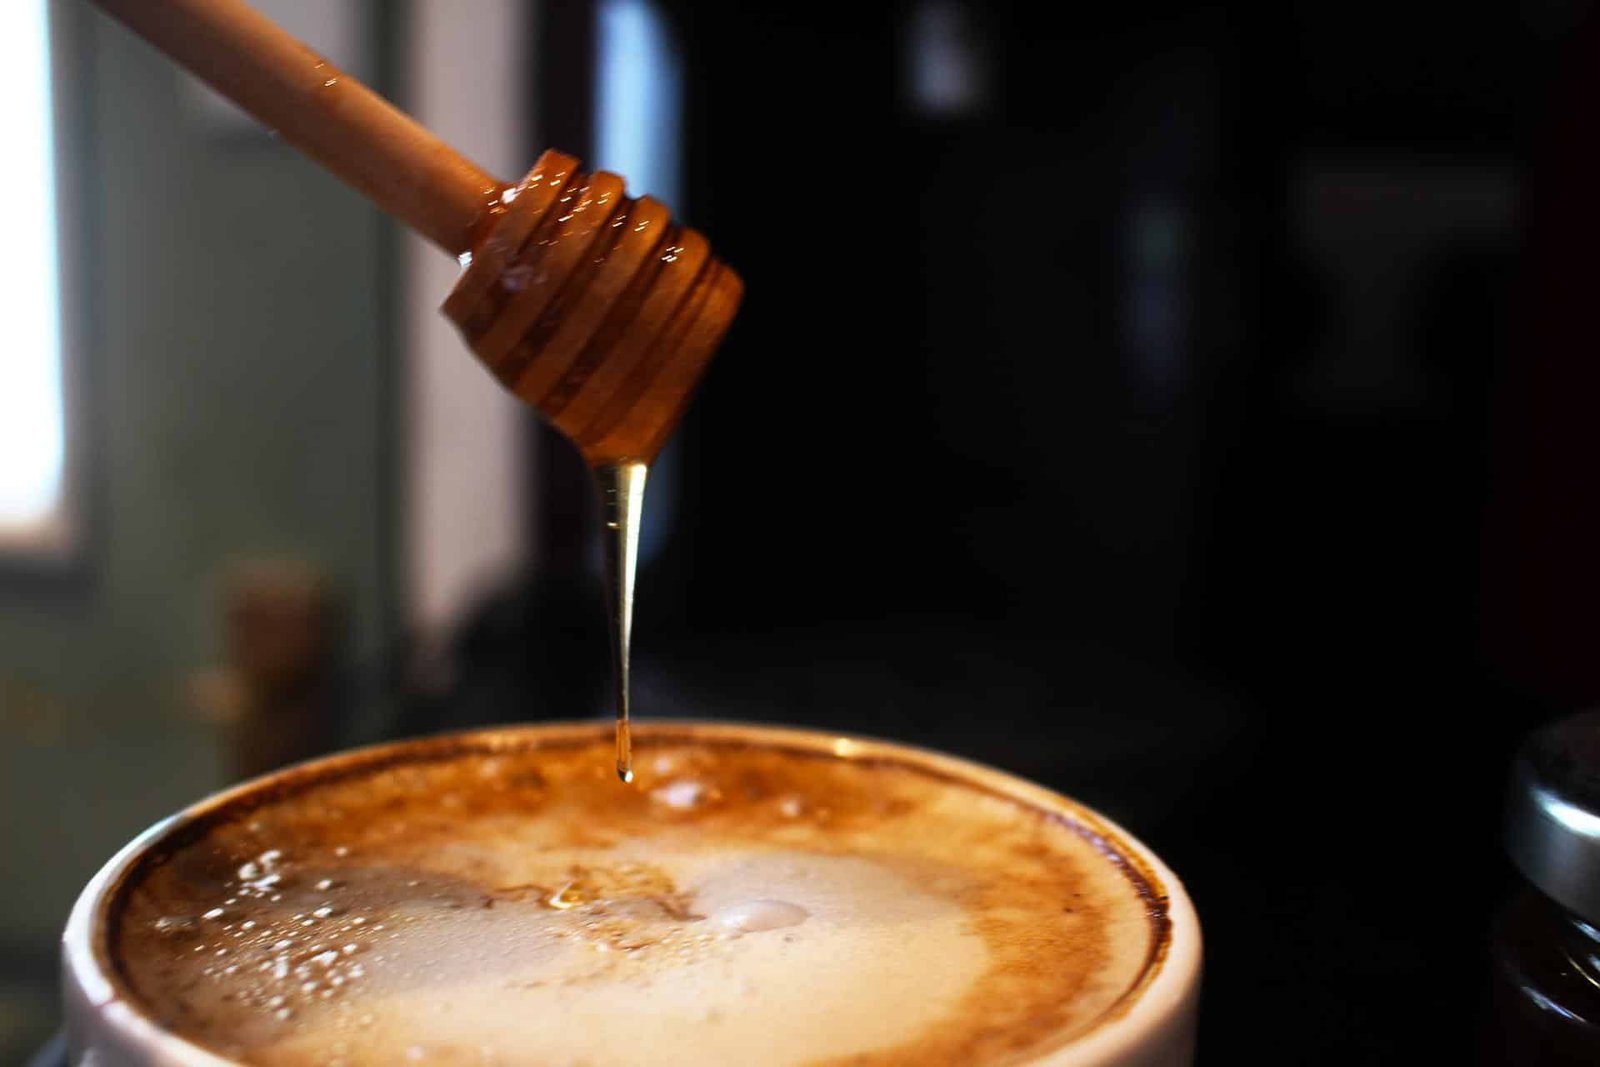 Pouring honey in coffee to sweeten it